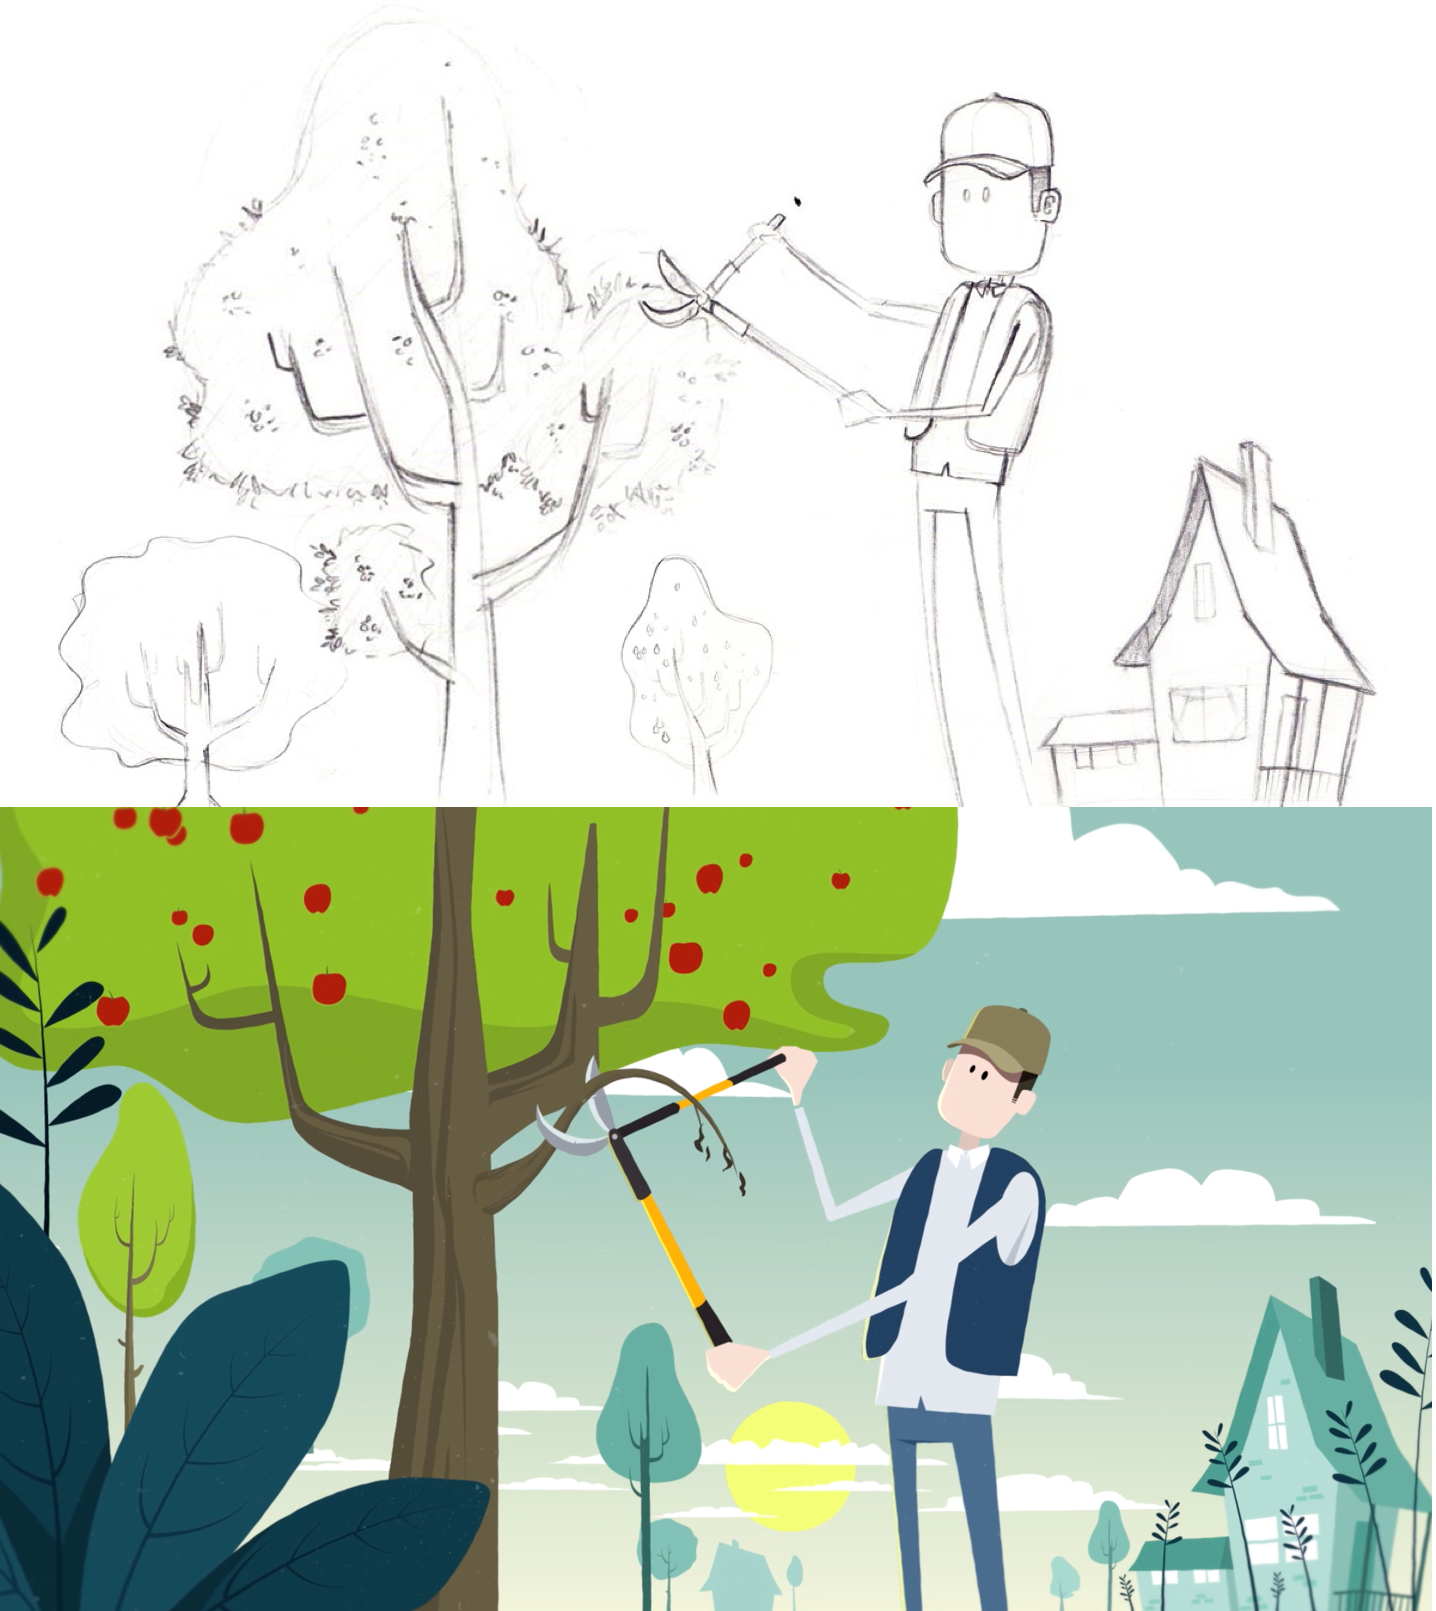 Sketch and illustration taken from a scene from the motion design video about apple trees diseases.